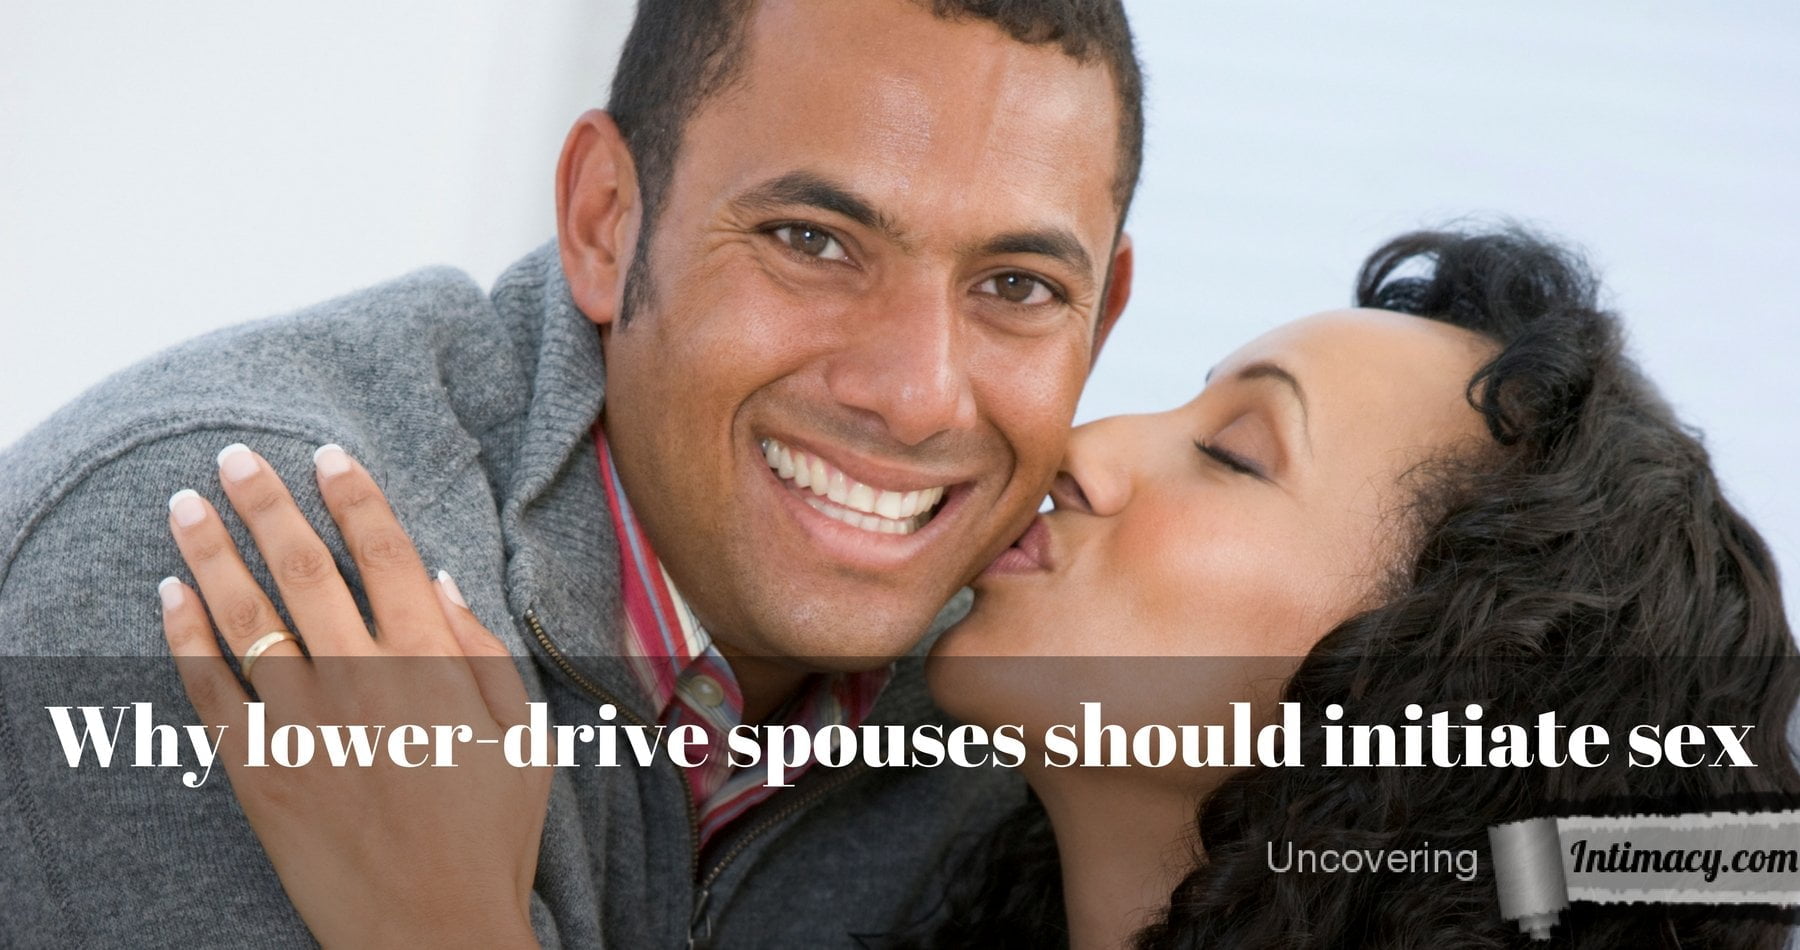 Why lower-drive spouses should initiate pic